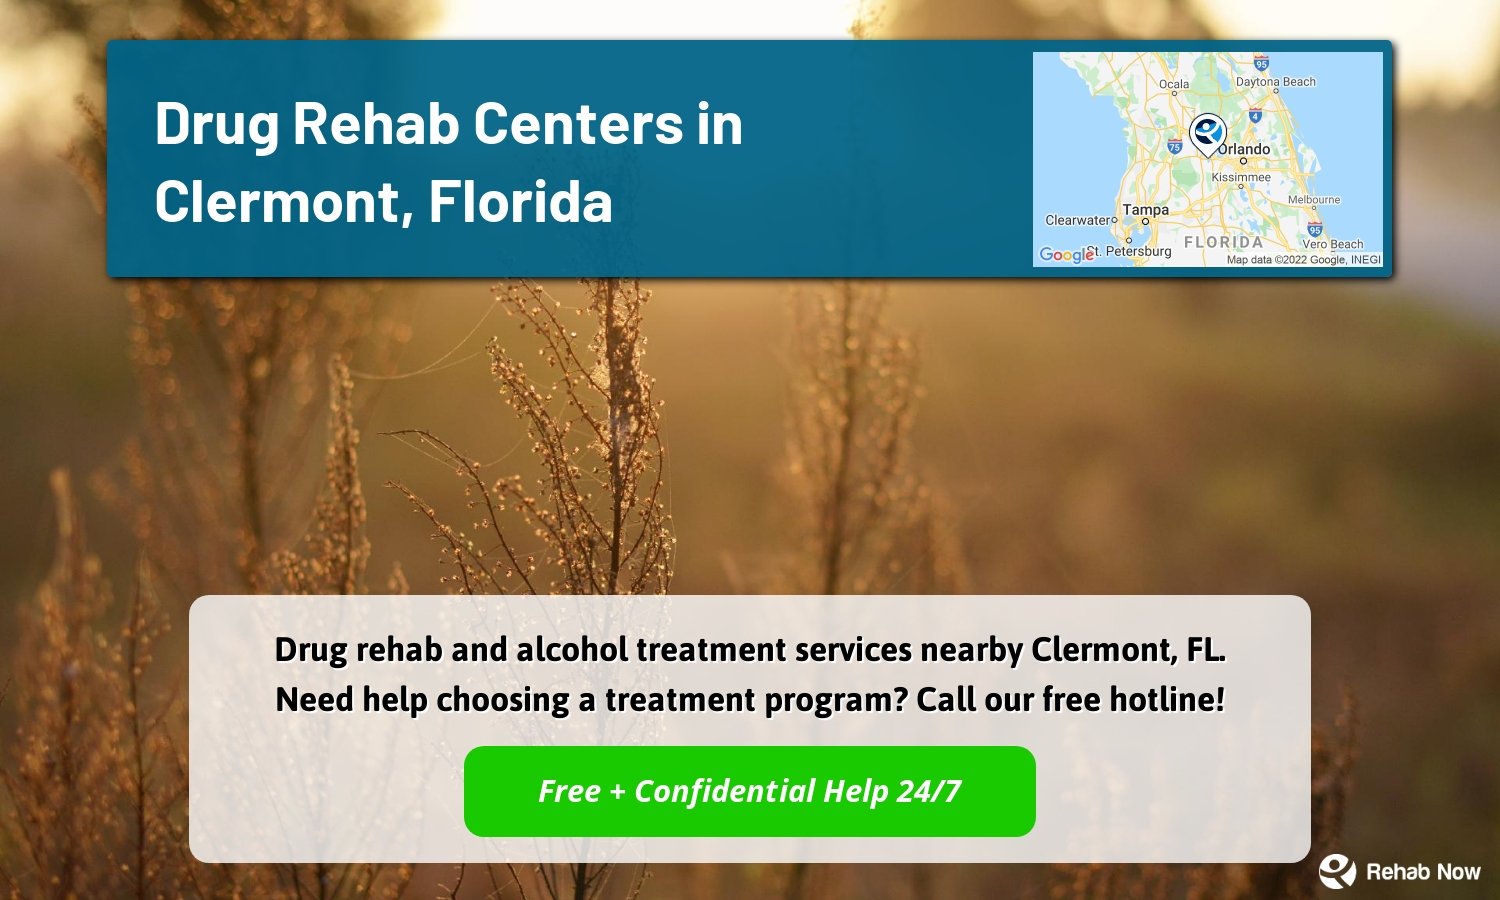 Drug rehab and alcohol treatment services nearby Clermont, FL. Need help choosing a treatment program? Call our free hotline!